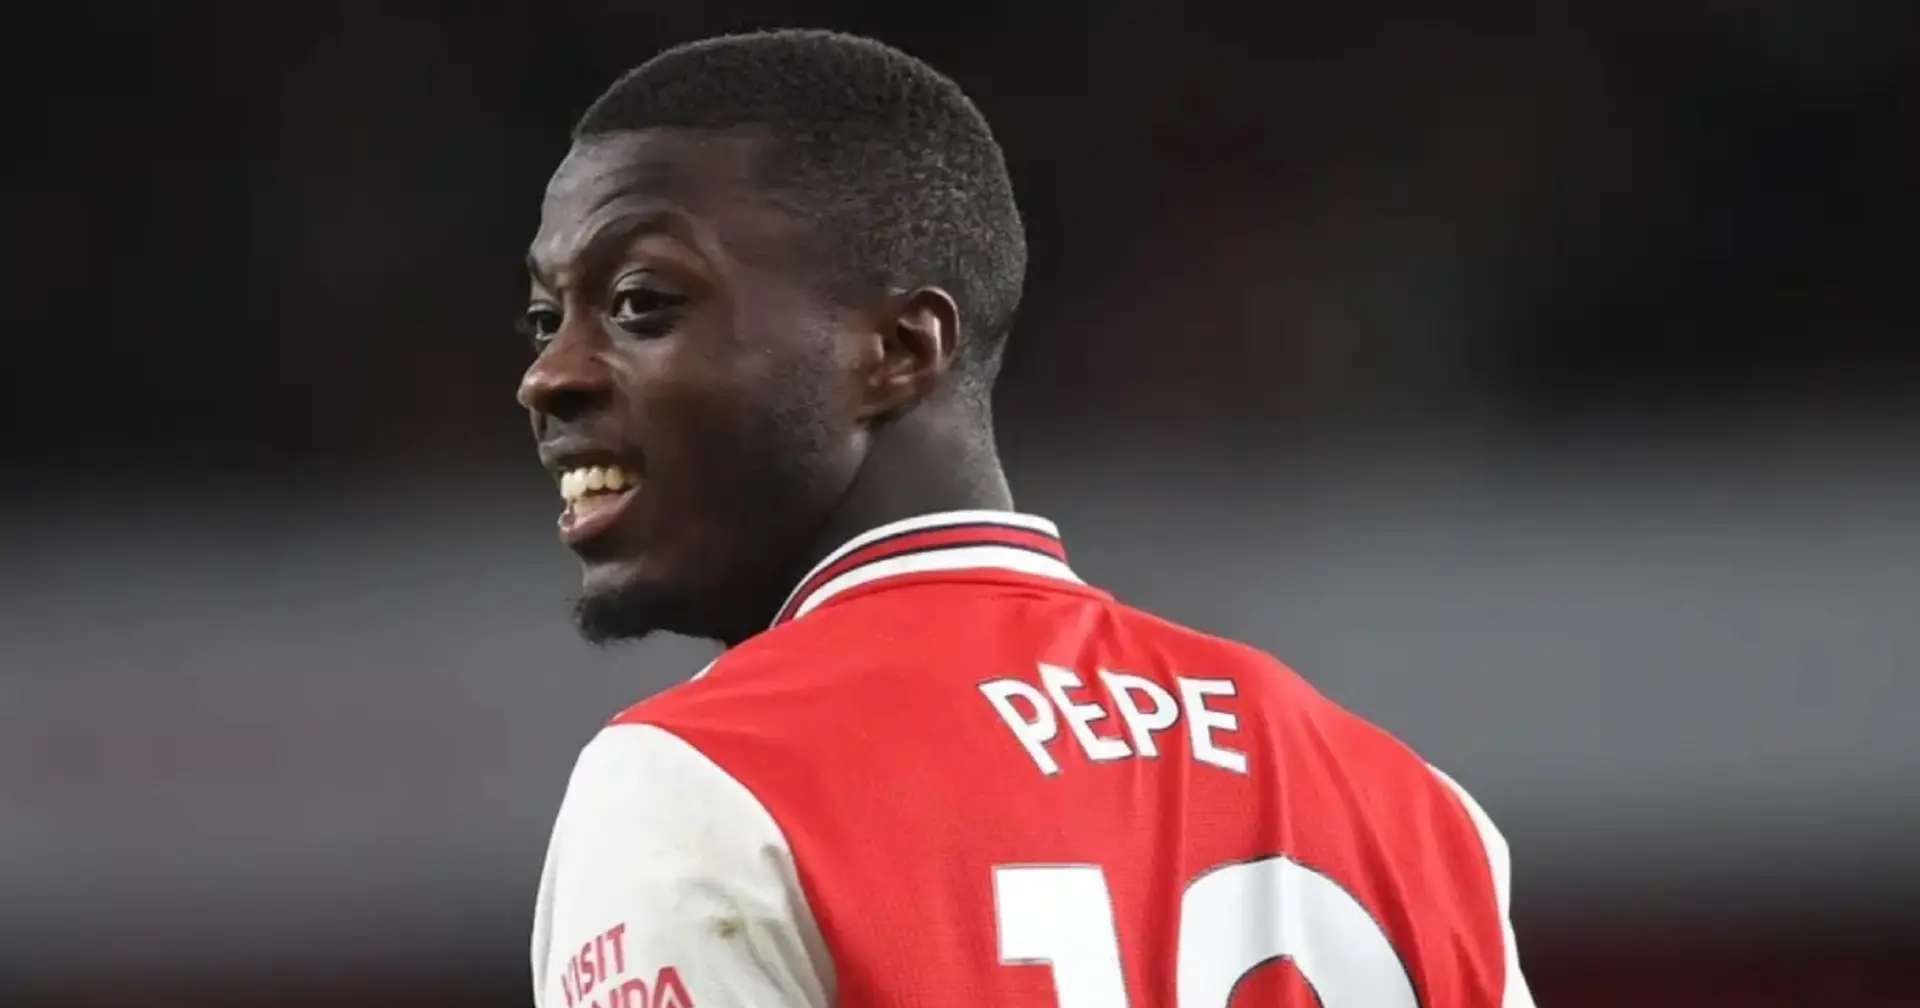 Foot Mercato: Nicolas Pepe's agent in talks with Nice over loan move (reliability: 4 stars)